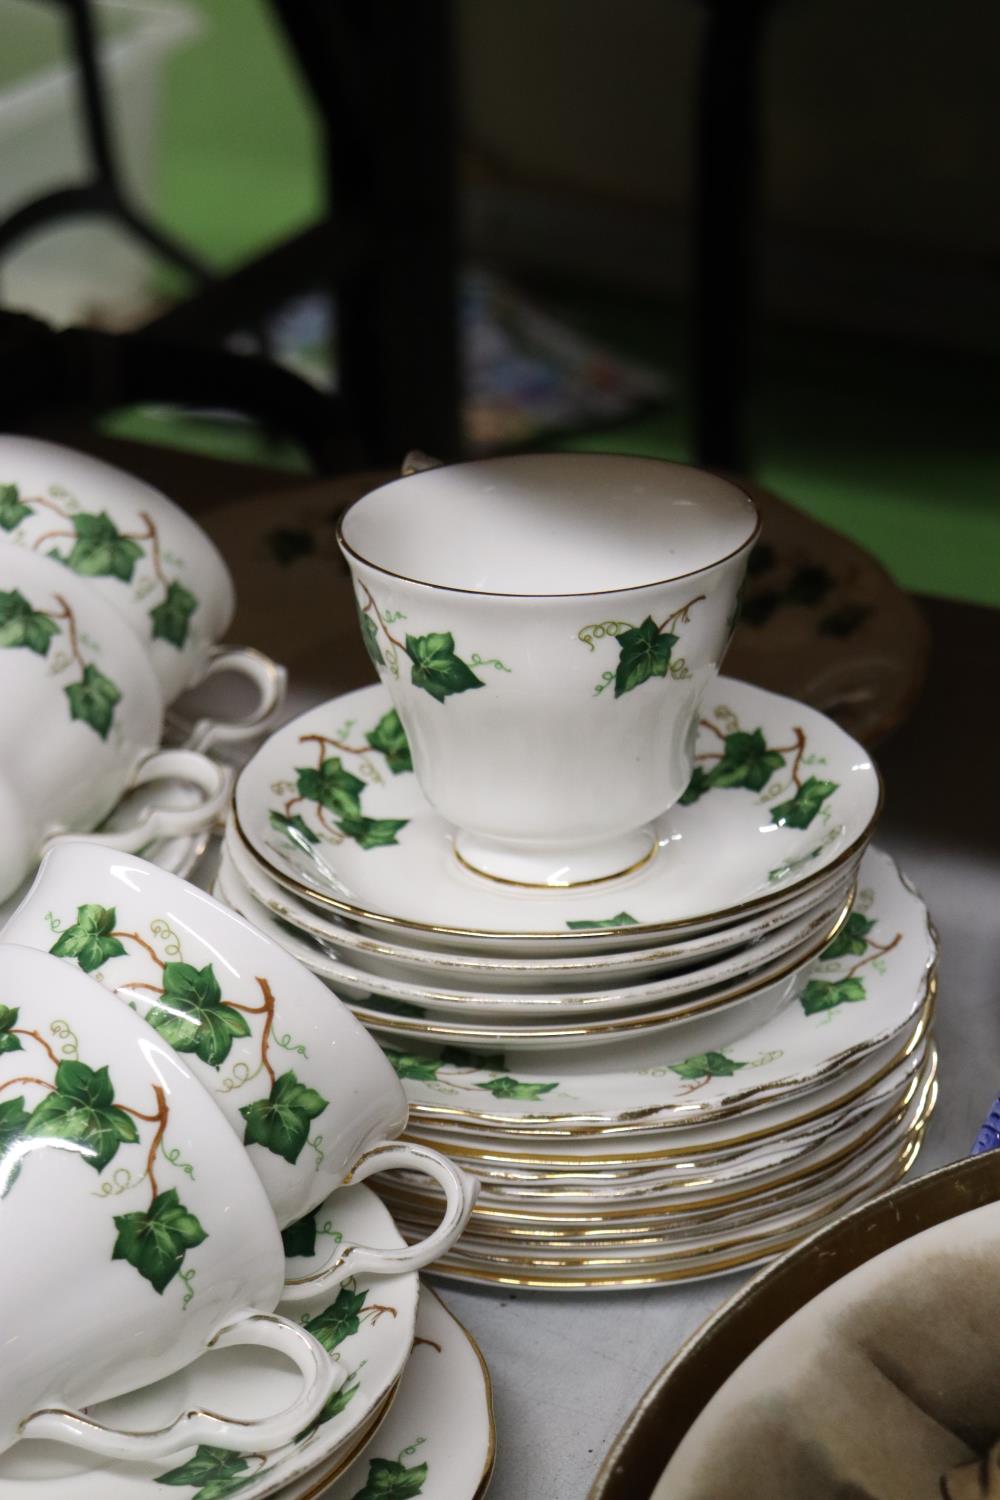 A COLCLOUGH 'IVY LEAF' PART TEASET TO INCLUDE CAKE PLATES, A CREAM JUG, CUPS, SAUCERS AND SIDE - Image 5 of 6